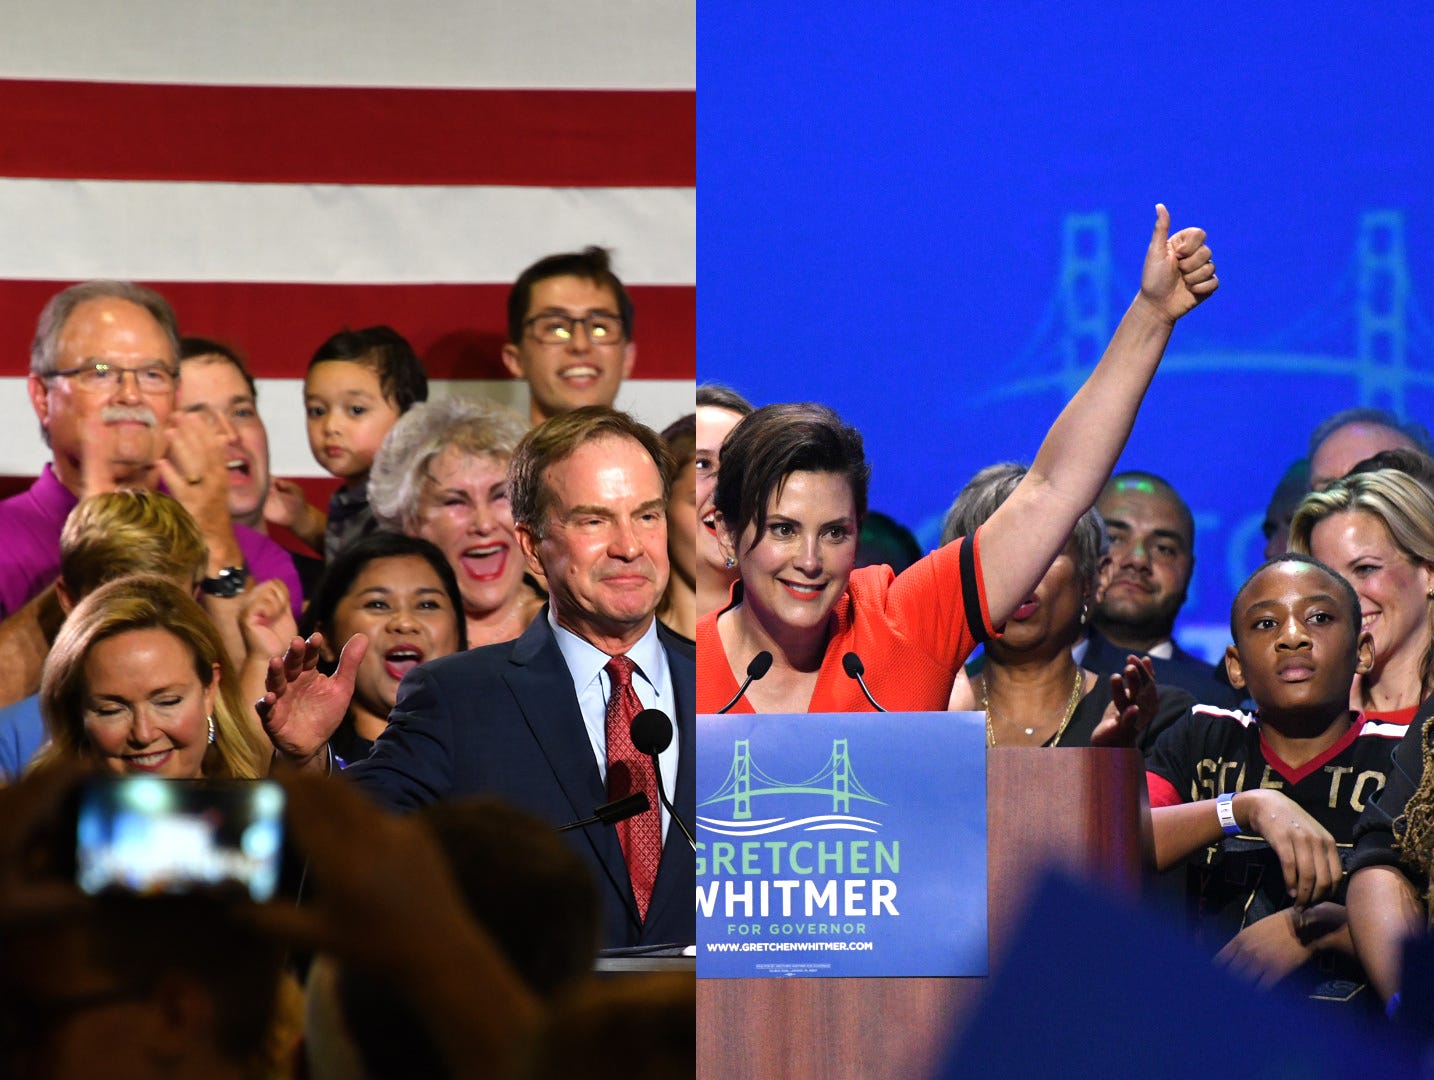 Michigan Attorney General Bill Schuette, left, and and former state Senate Democratic Leader Gretchen Whitmer will compete to be Michigan’s next governor after winning party primary fights Tuesday night.